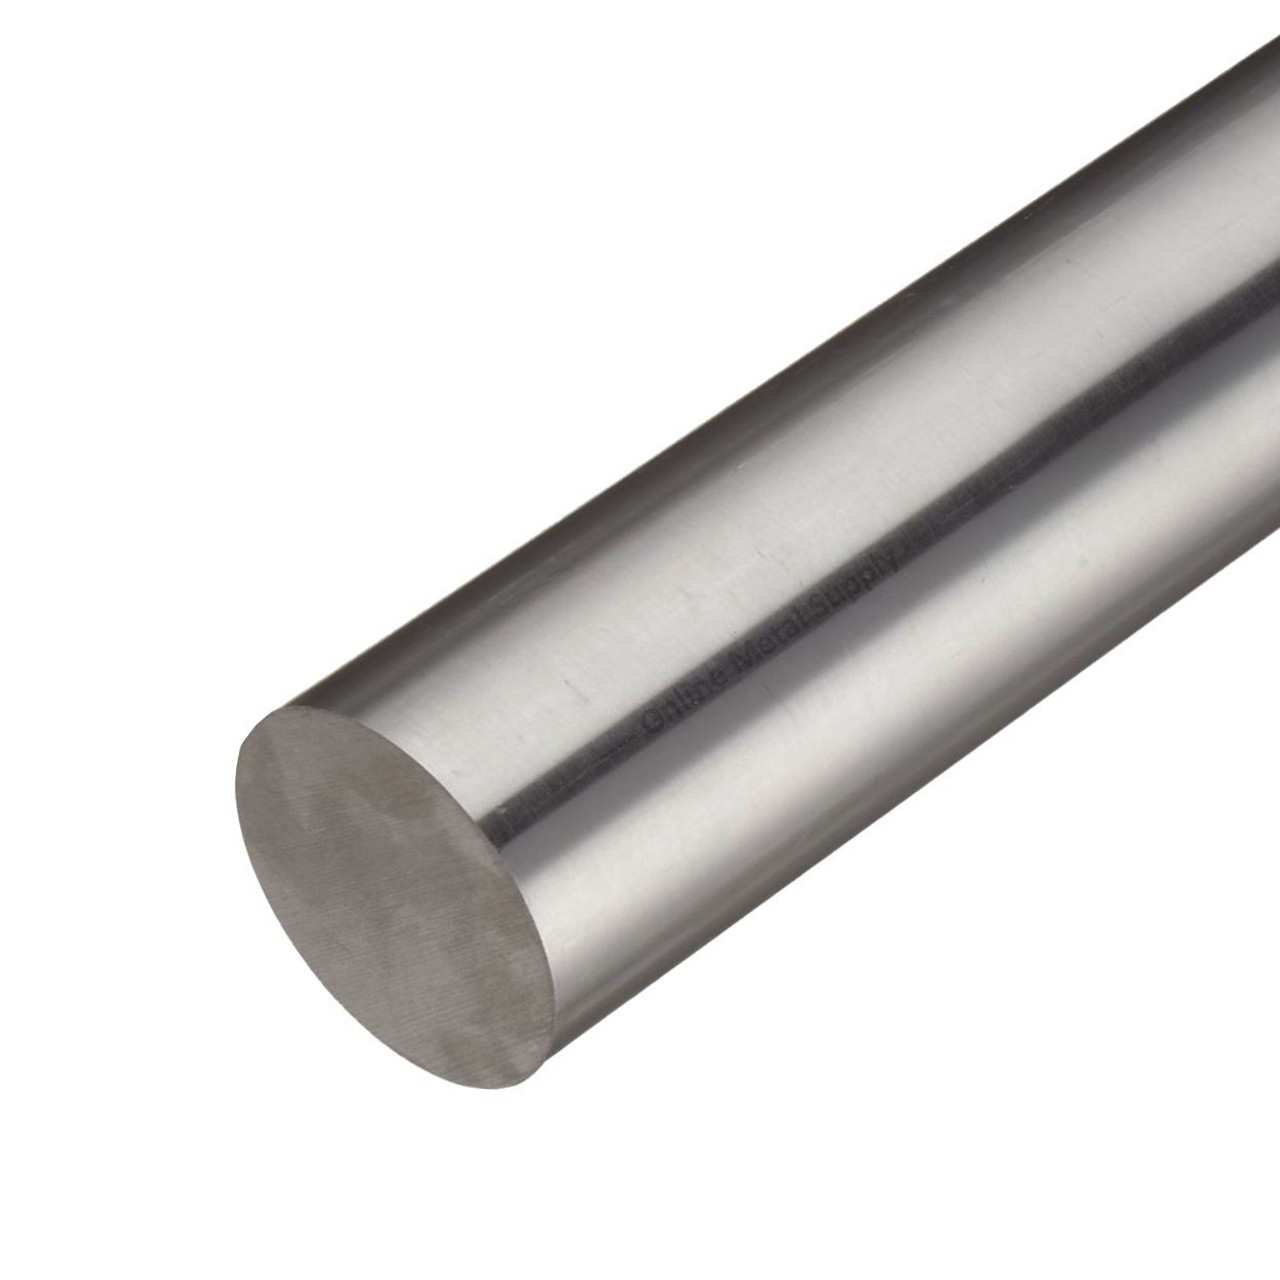 1.125 (1-1/8 inch) x 36 inches, 17-4 Cond A Stainless Steel Round Rod, Cold Finished